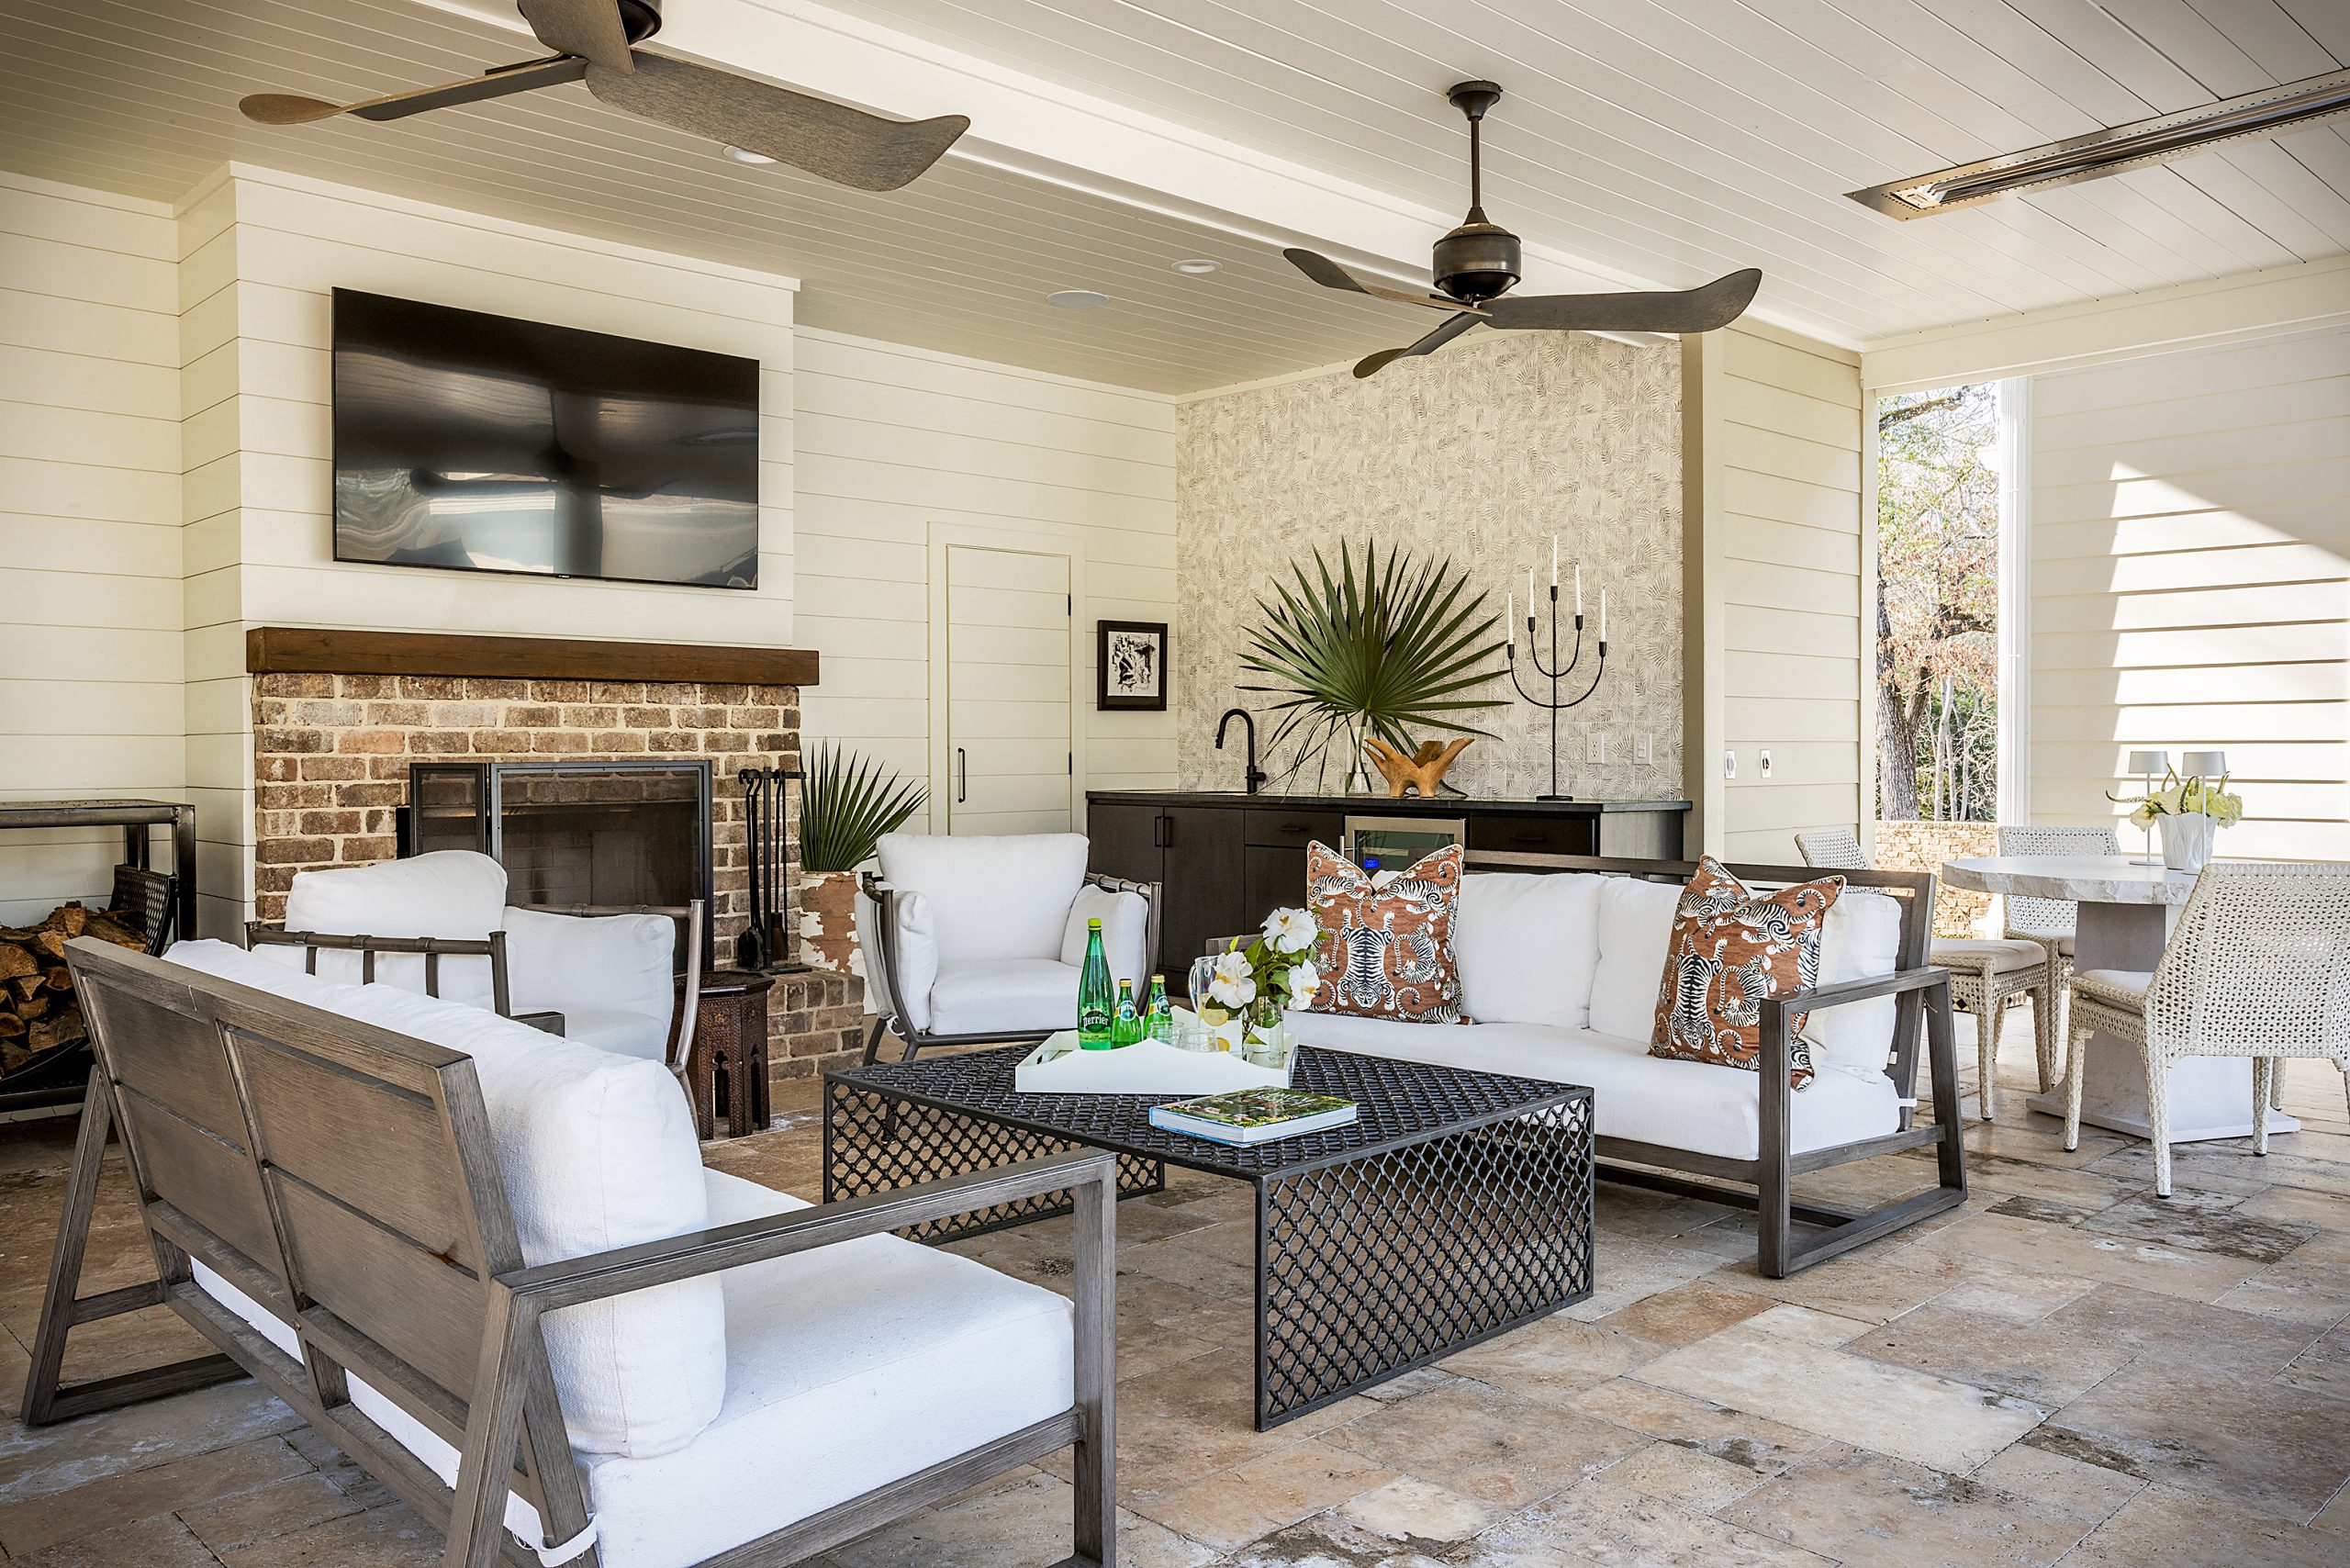  The pool house is an inviting addition that has a comfortable seating area, fireplace, dining area, grilling features, and a large television. More sleeping options are upstairs for their six children and the constant flow of friends! 